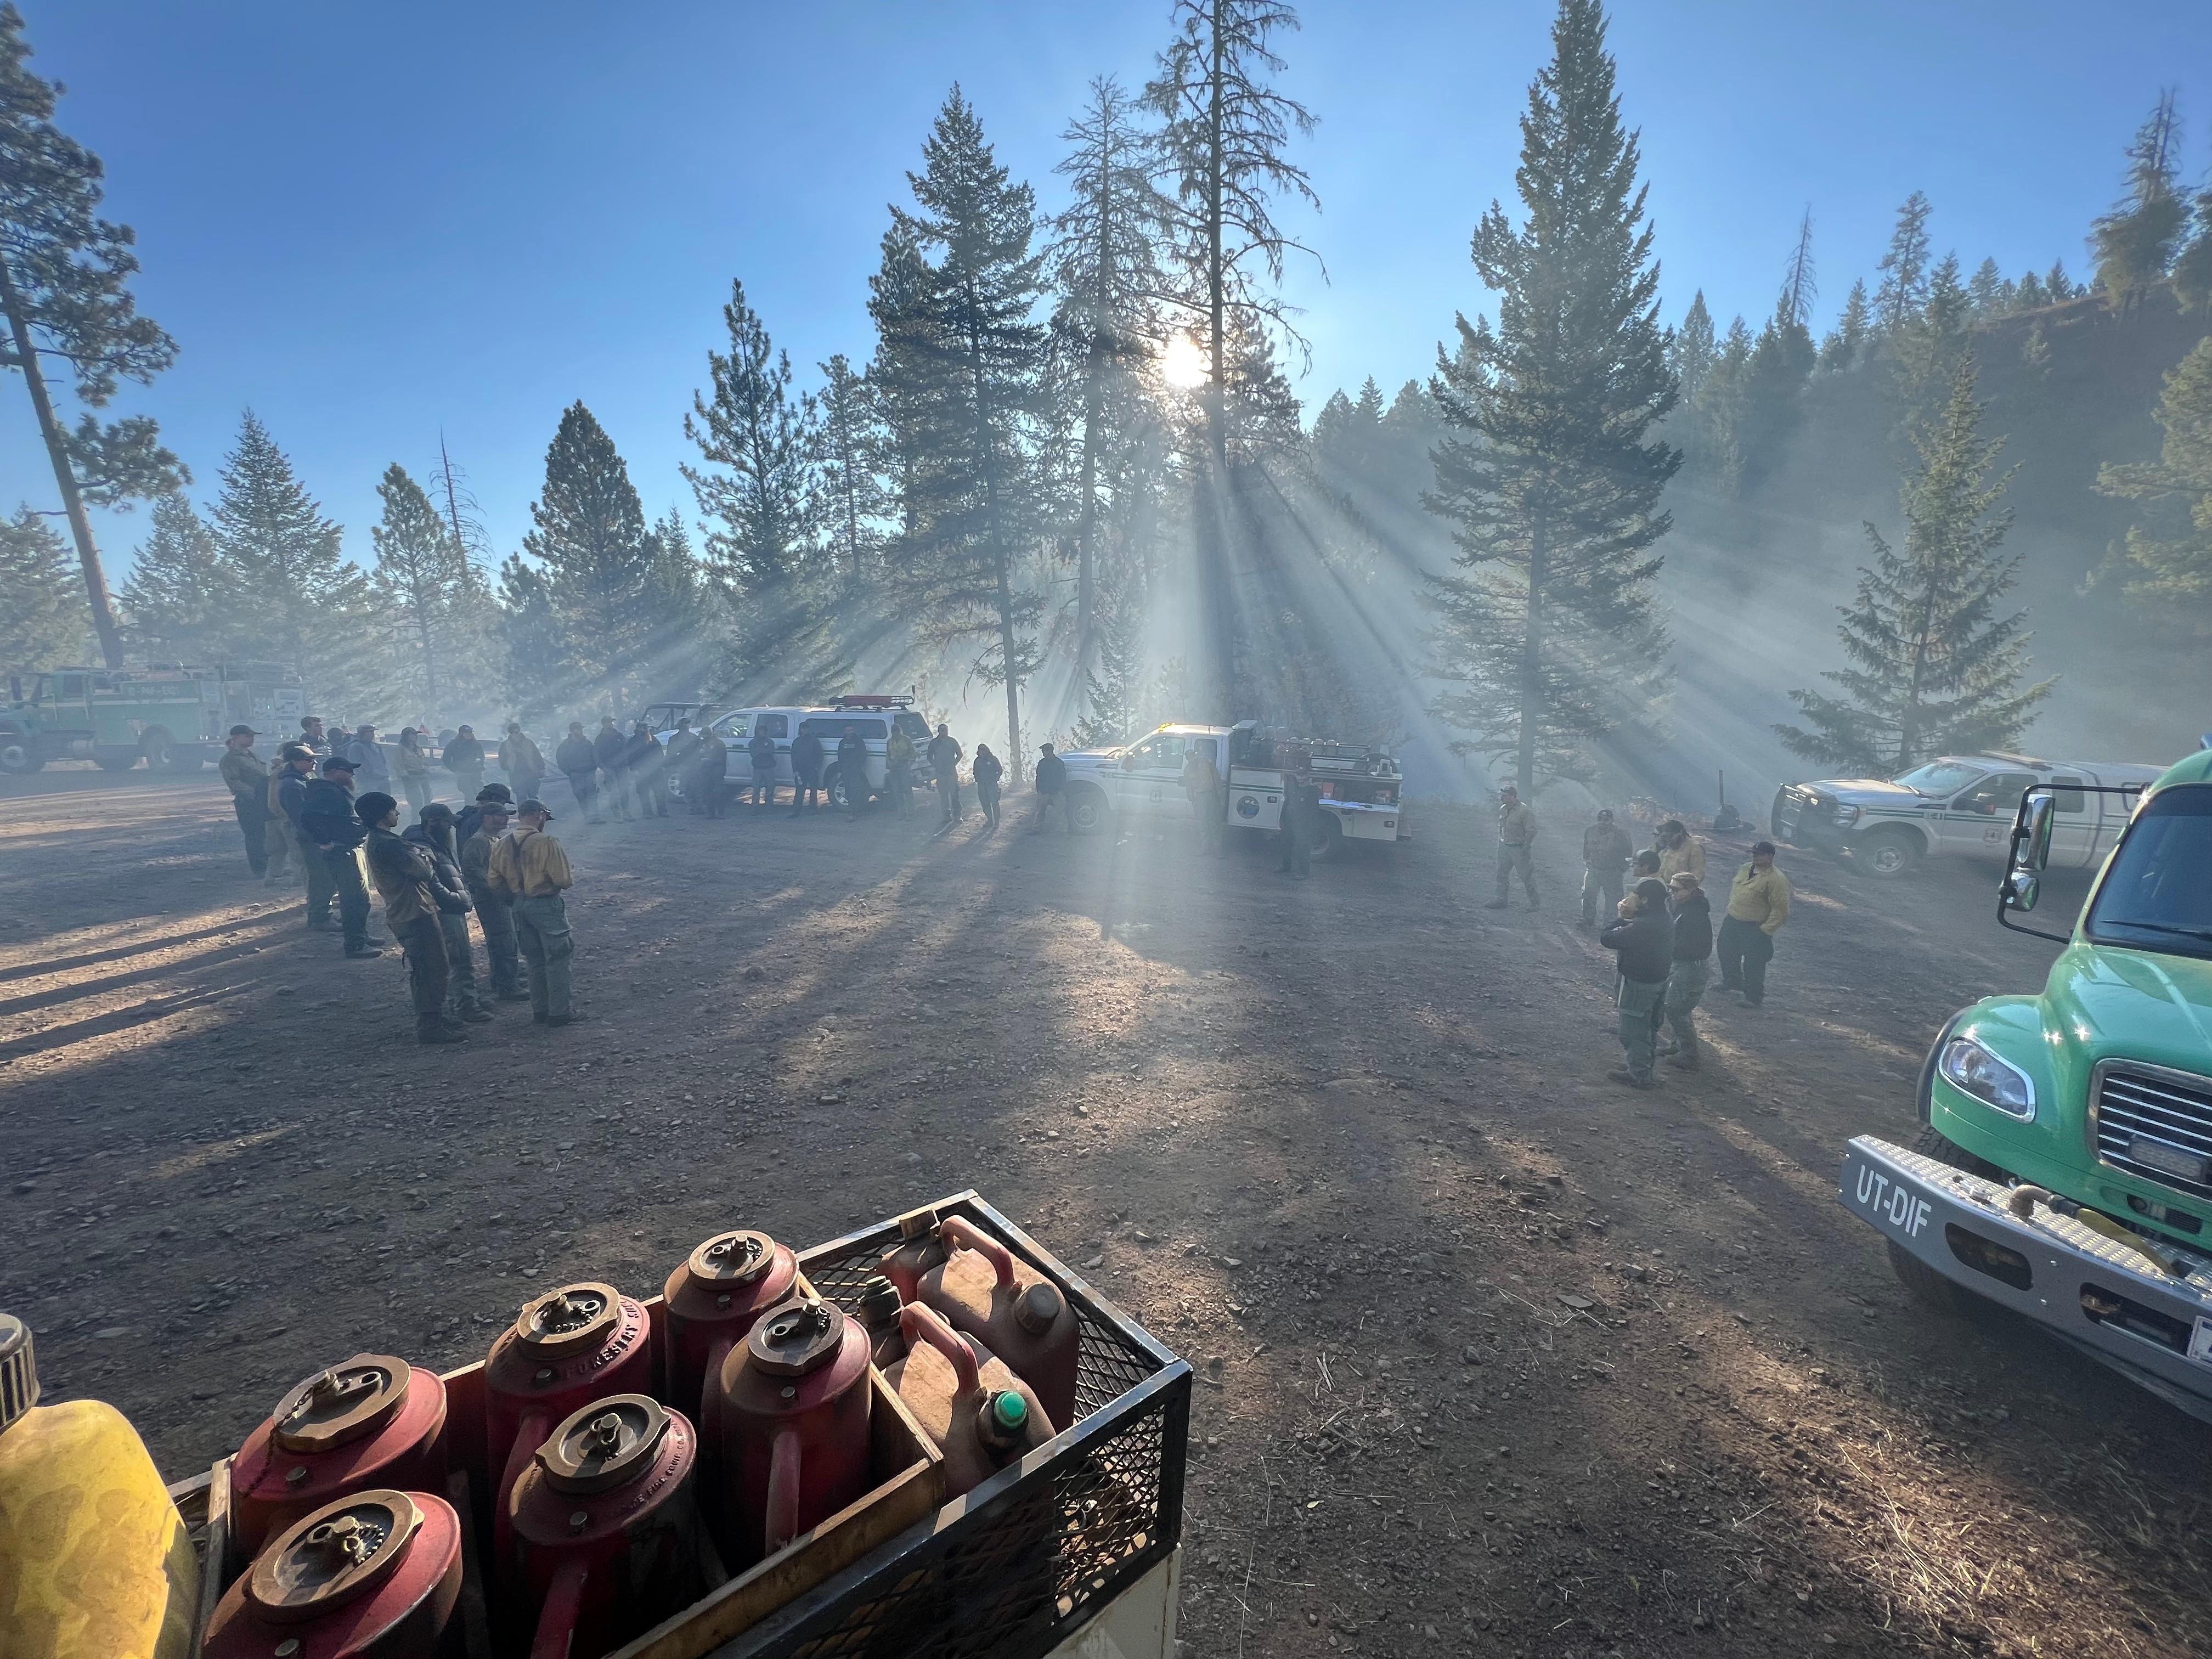 Firefighters are shown gathered around vehicles as the sun comes up behind them. Light smoke in the air highlights the suns’ rays through breaks in the trees behind the firefighters.